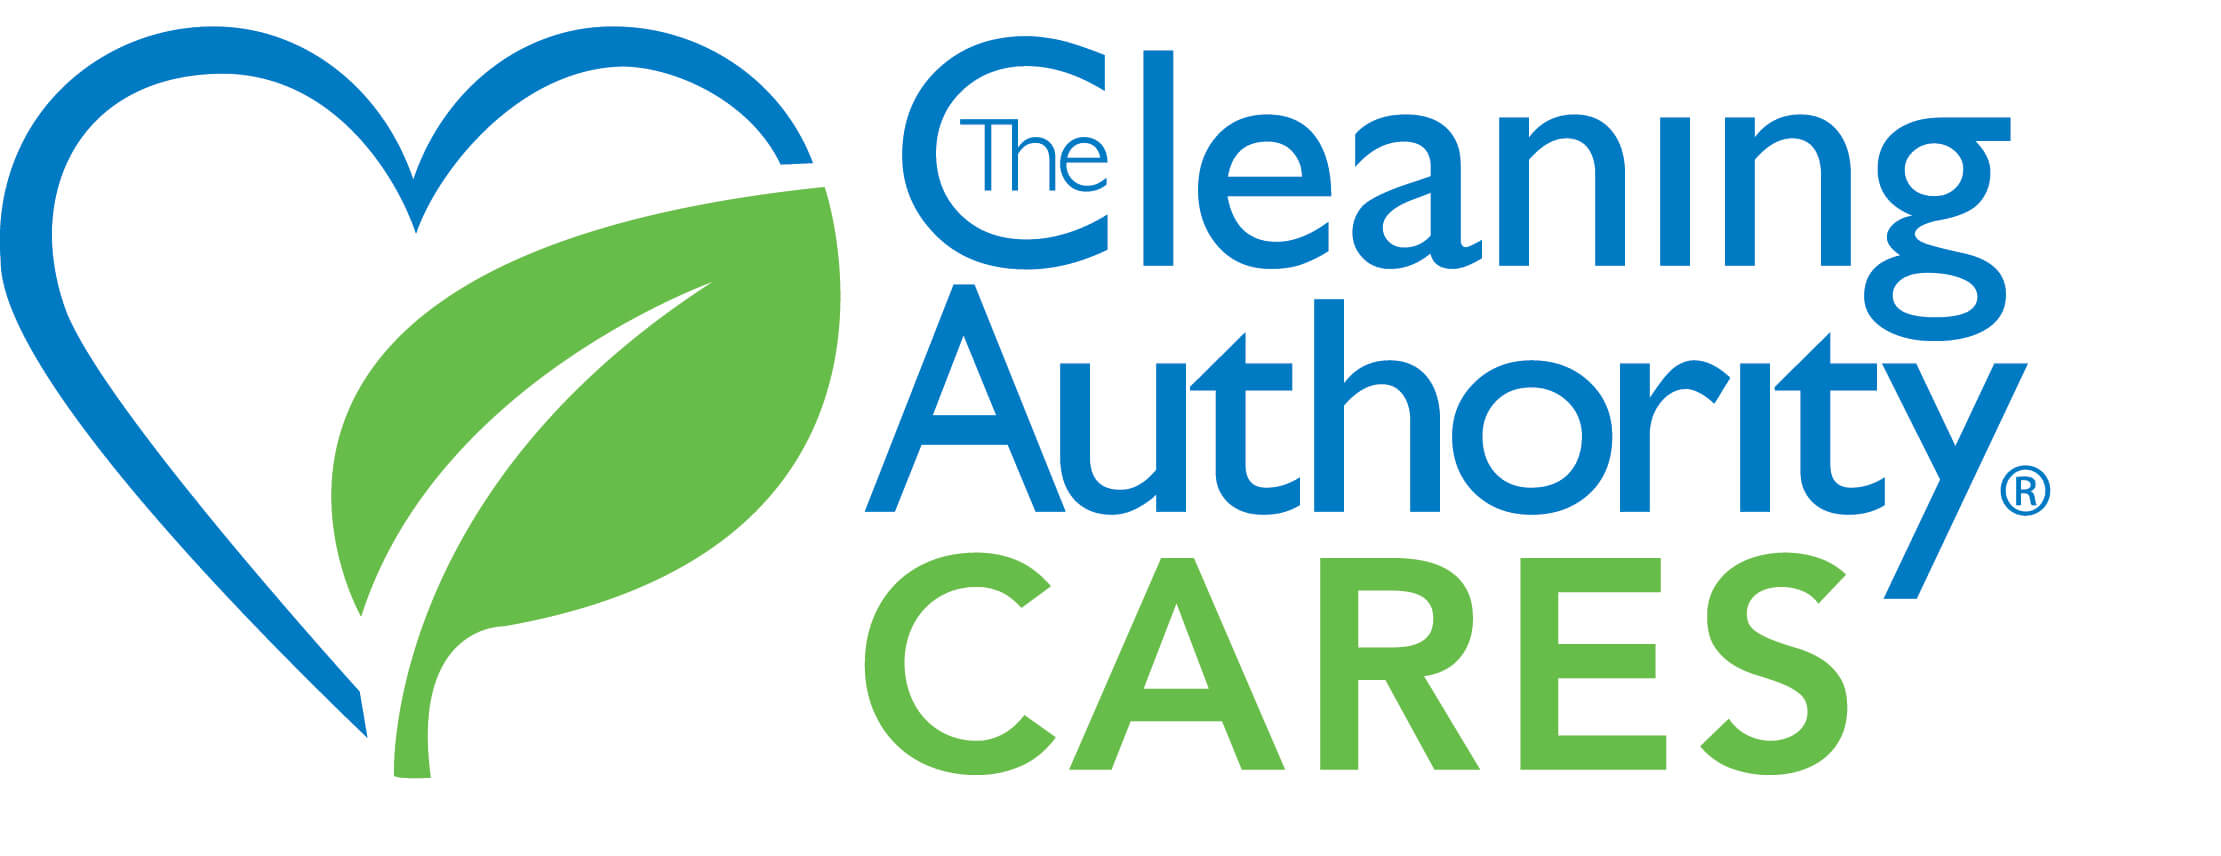 The Cleaning Authority Cares logo